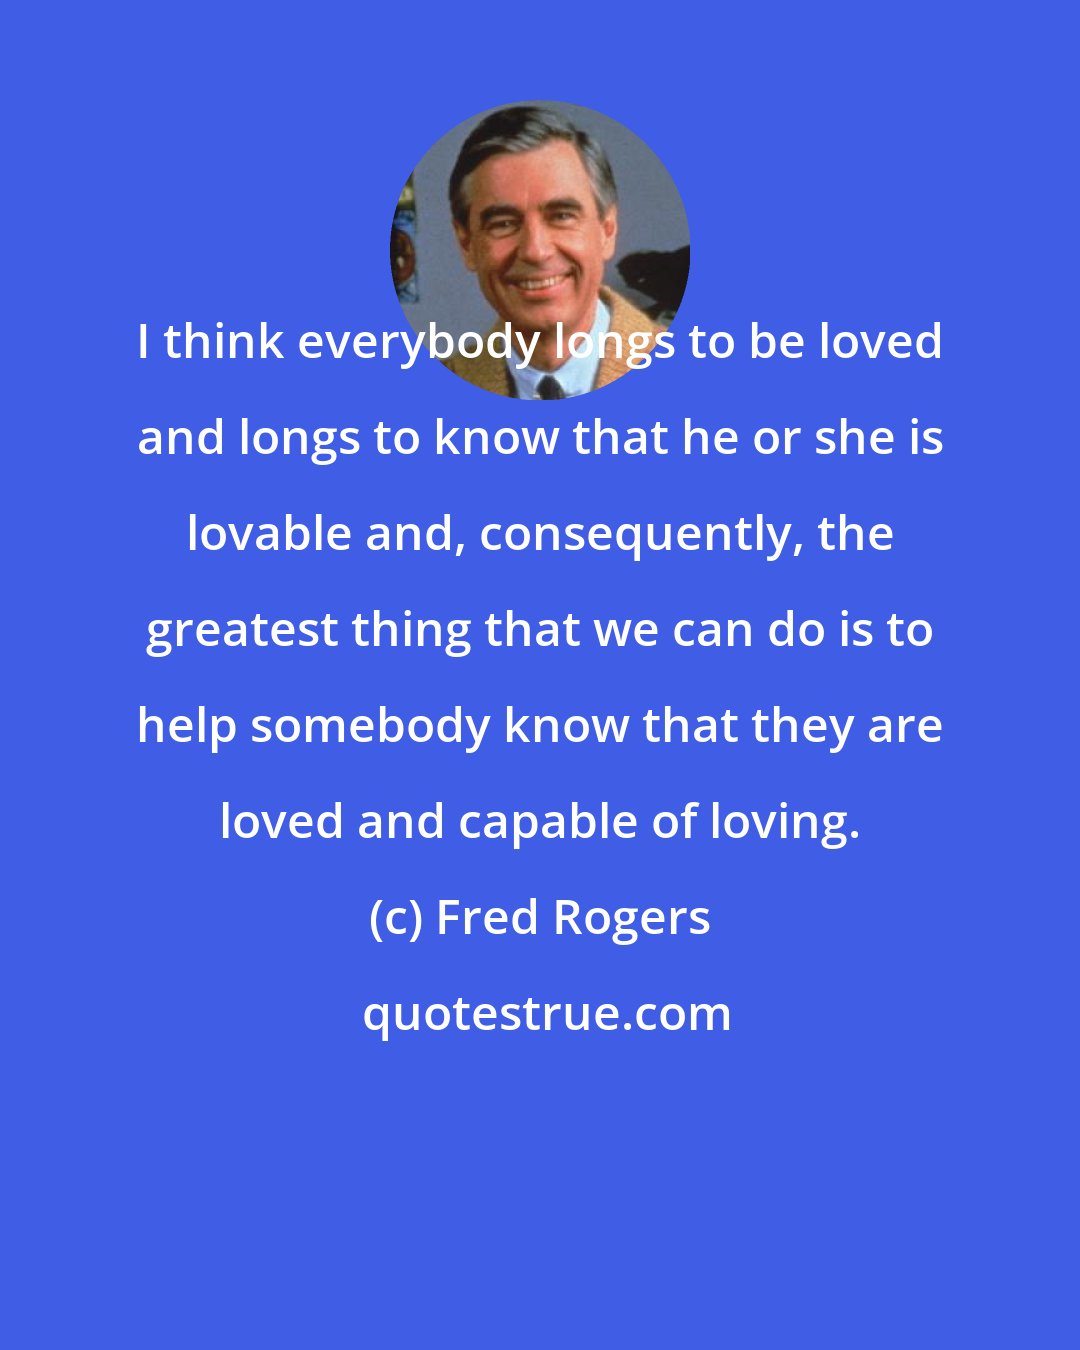 Fred Rogers: I think everybody longs to be loved and longs to know that he or she is lovable and, consequently, the greatest thing that we can do is to help somebody know that they are loved and capable of loving.